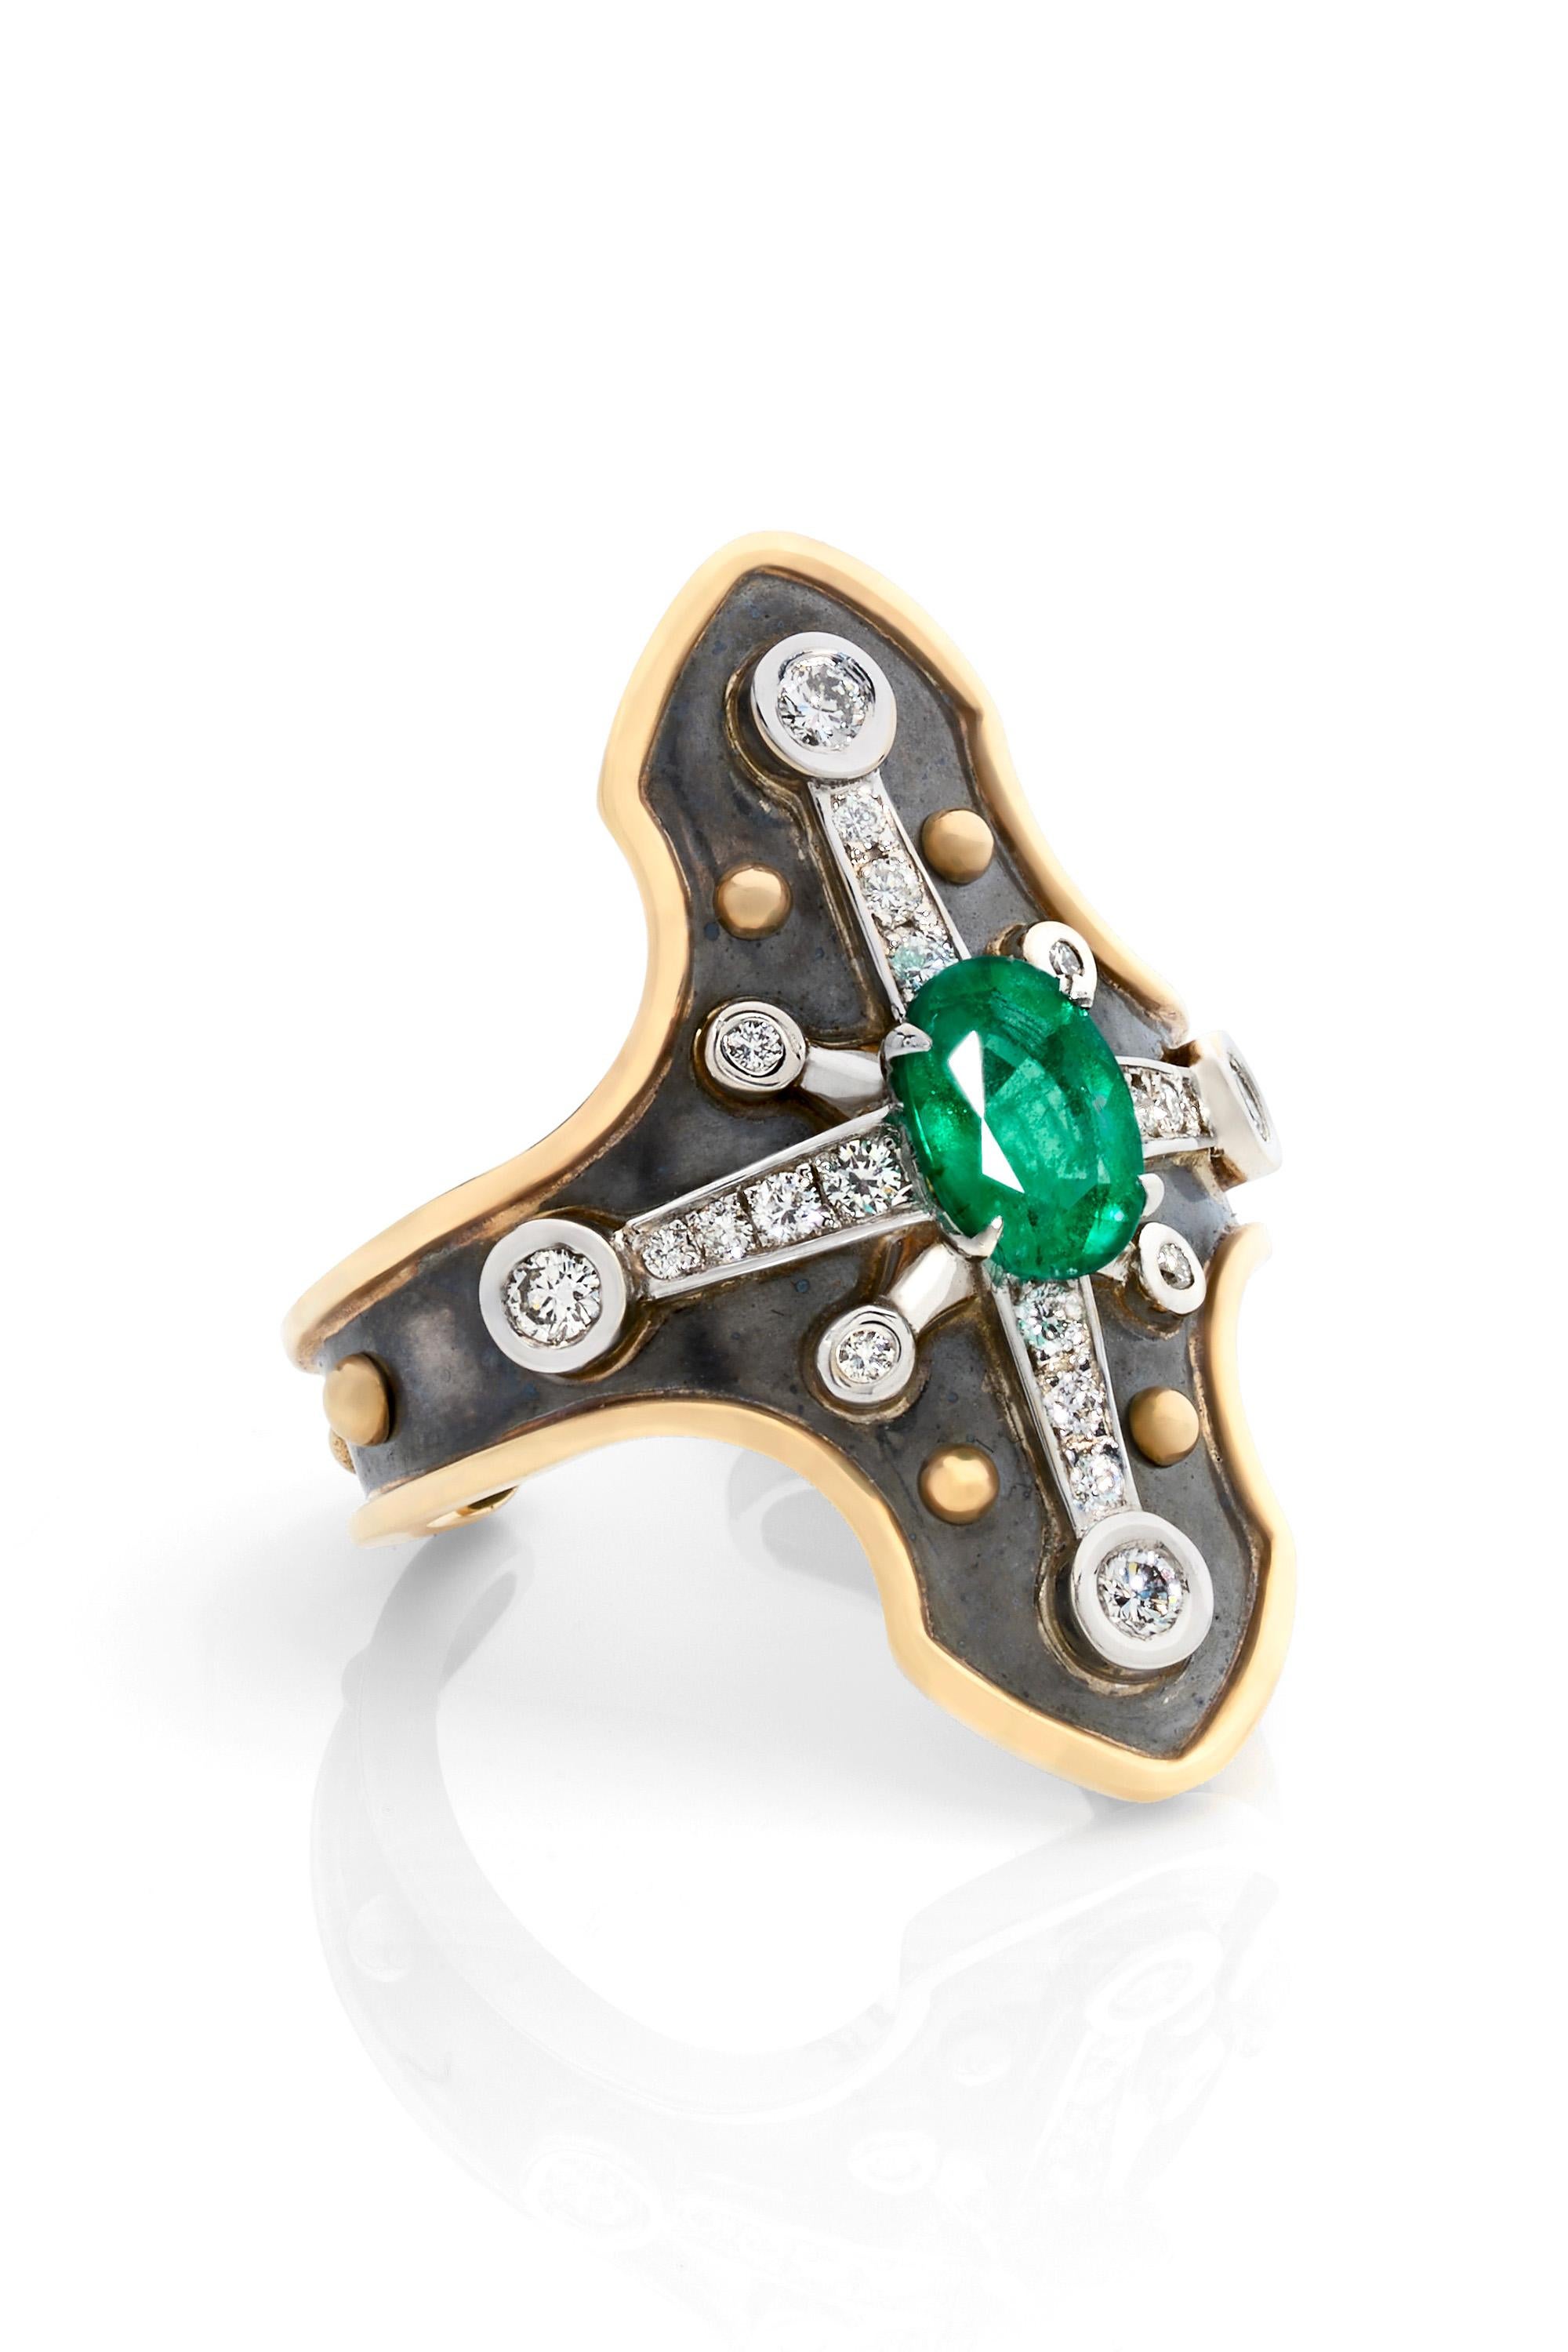 Yellow gold and distressed silver ring studded with an oval emerald surrounded by diamonds and set on a white gold star.

Details:
Emerald: 7x5x 0.8 cts
22 Diamonds : 0.33 cts    
18k Gold : 4.5 g 
Distressed Silver: 3 g
Made in France